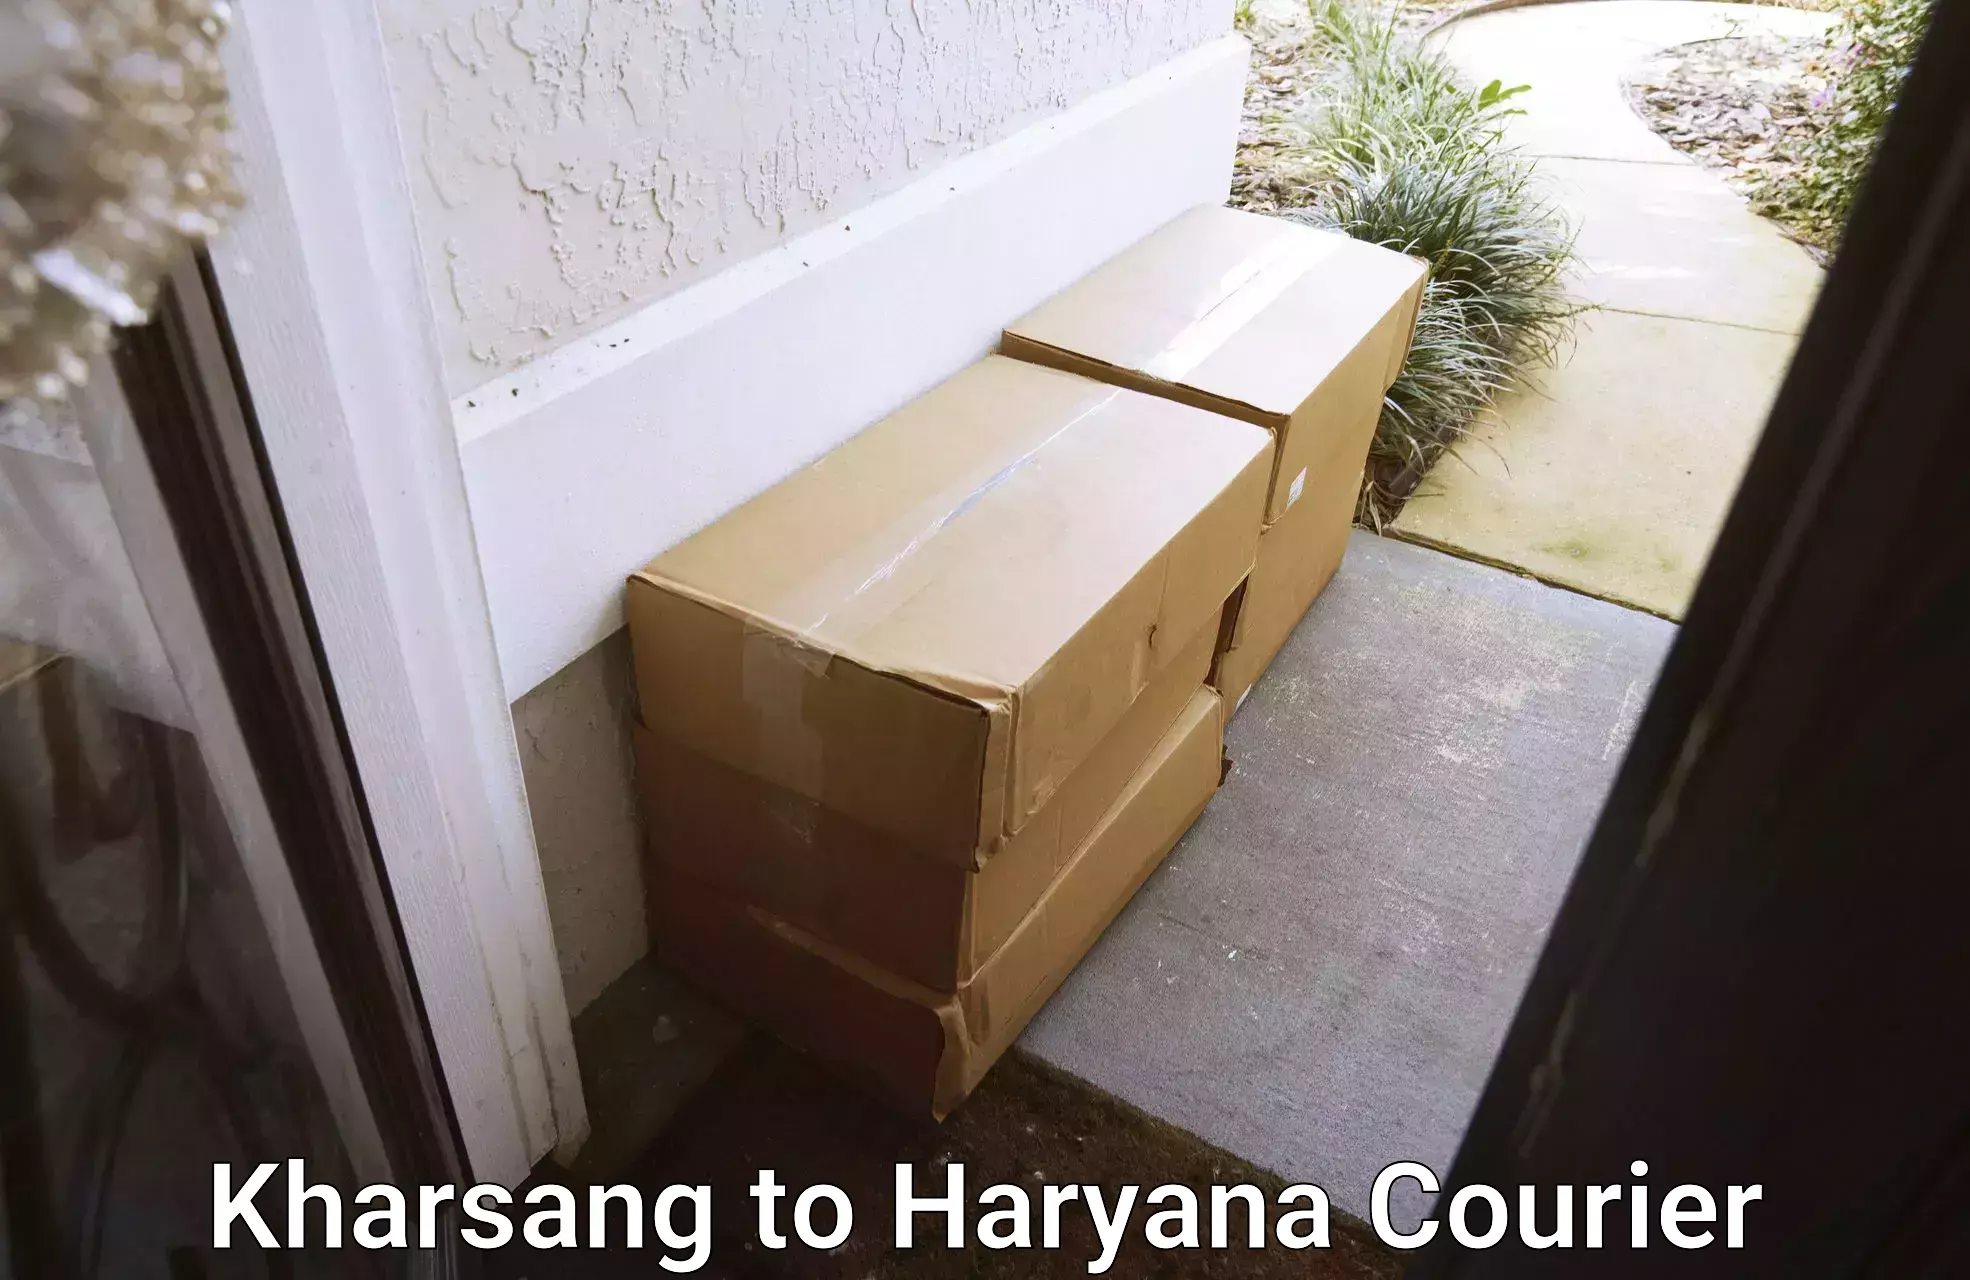 24-hour courier service Kharsang to NCR Haryana